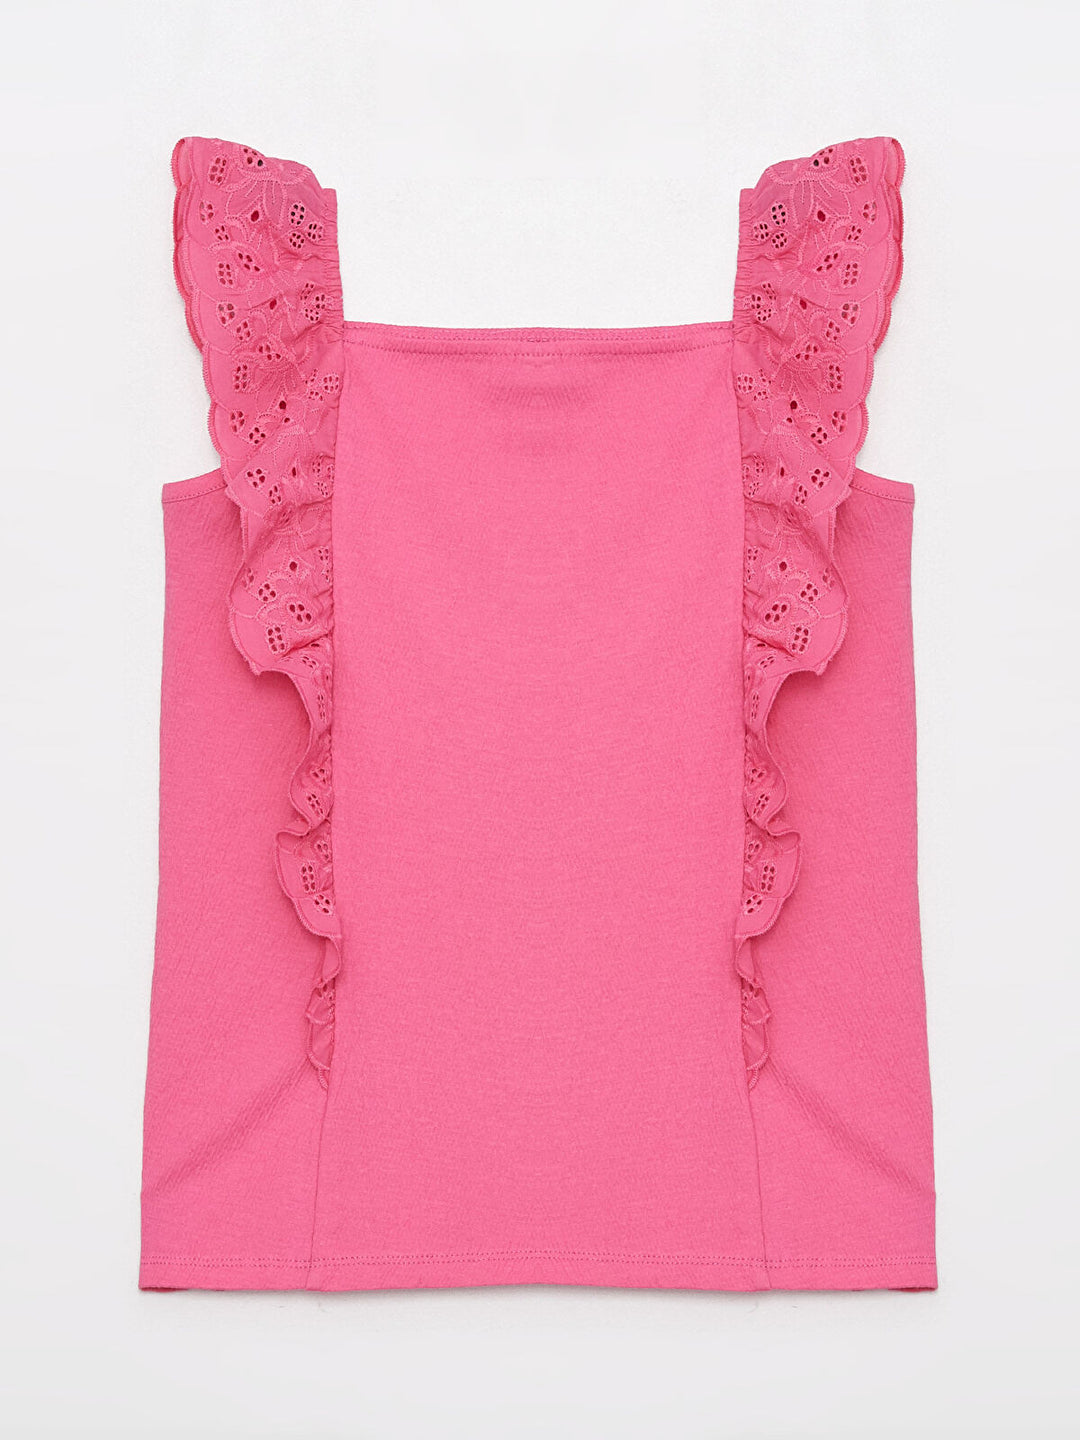 Square Neck Scalloped Detailed Girls Blouse